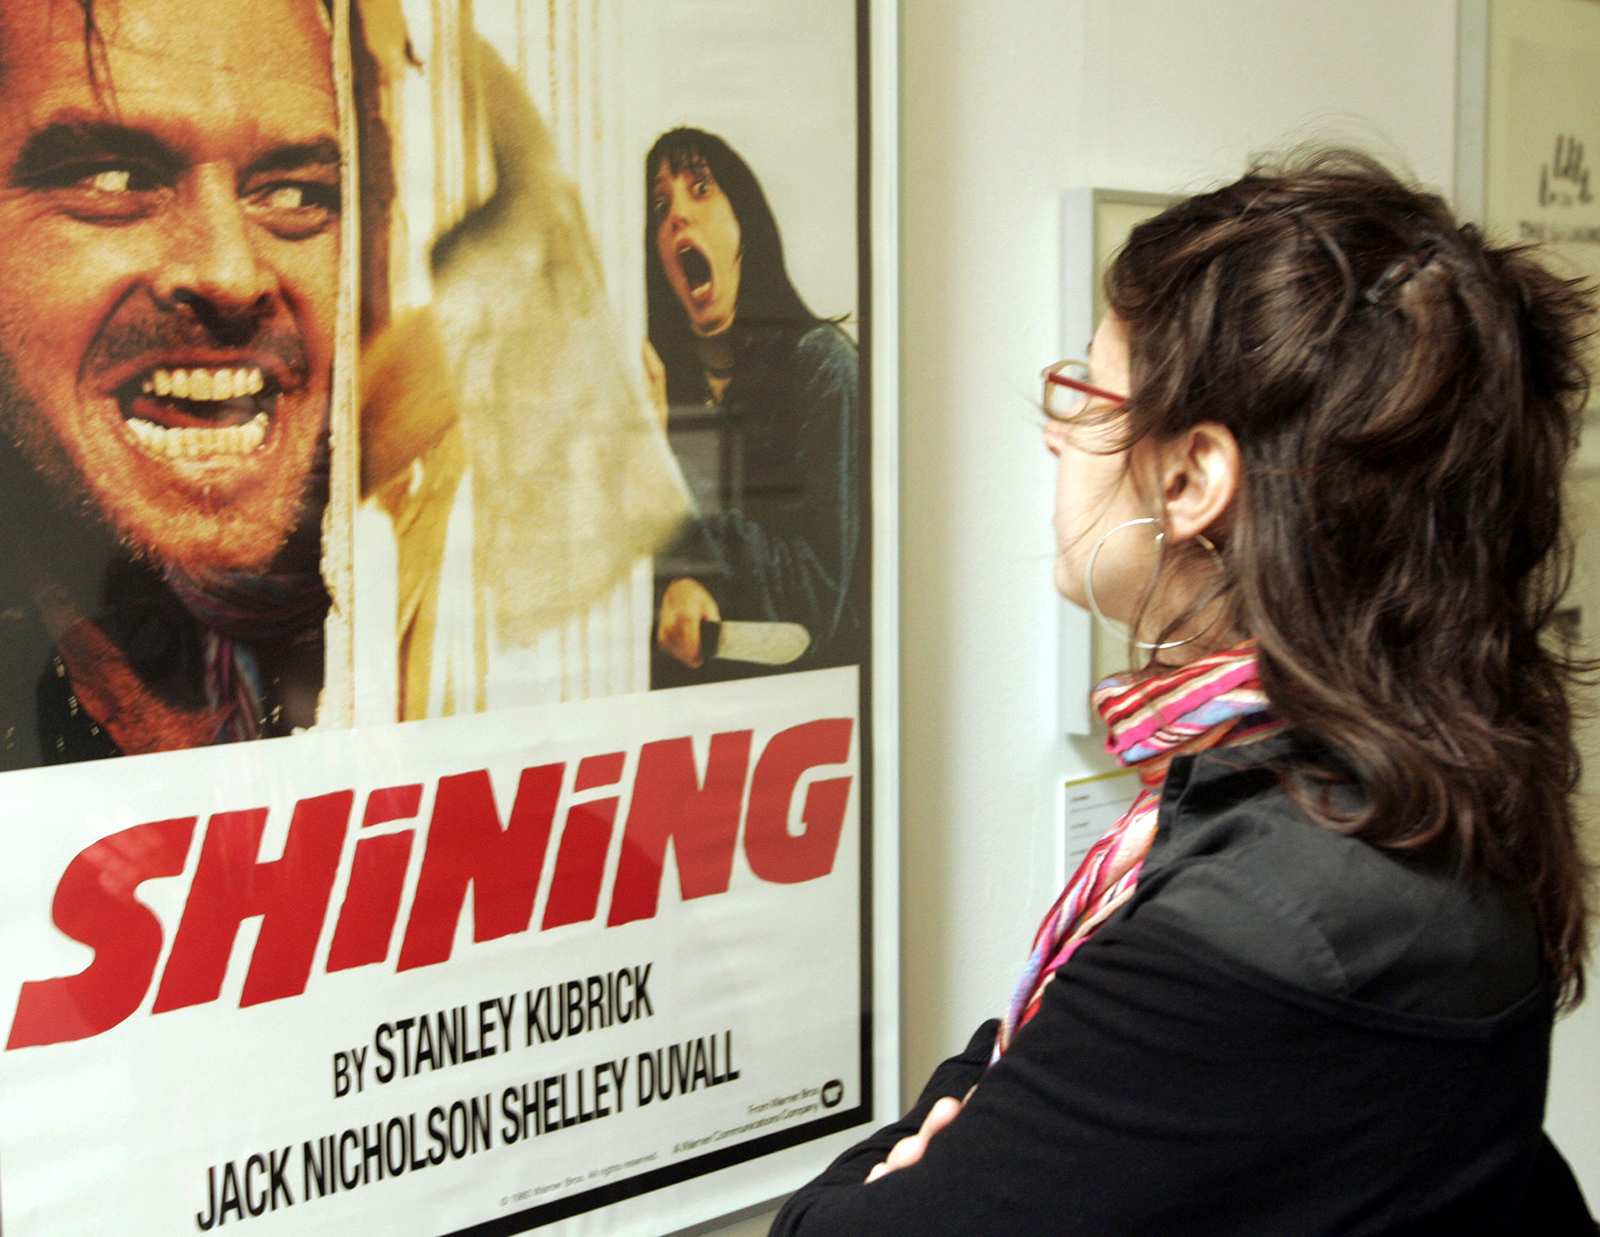 Fire breaks out at Oregon hotel featured in ‘The Shining’ | American Military News